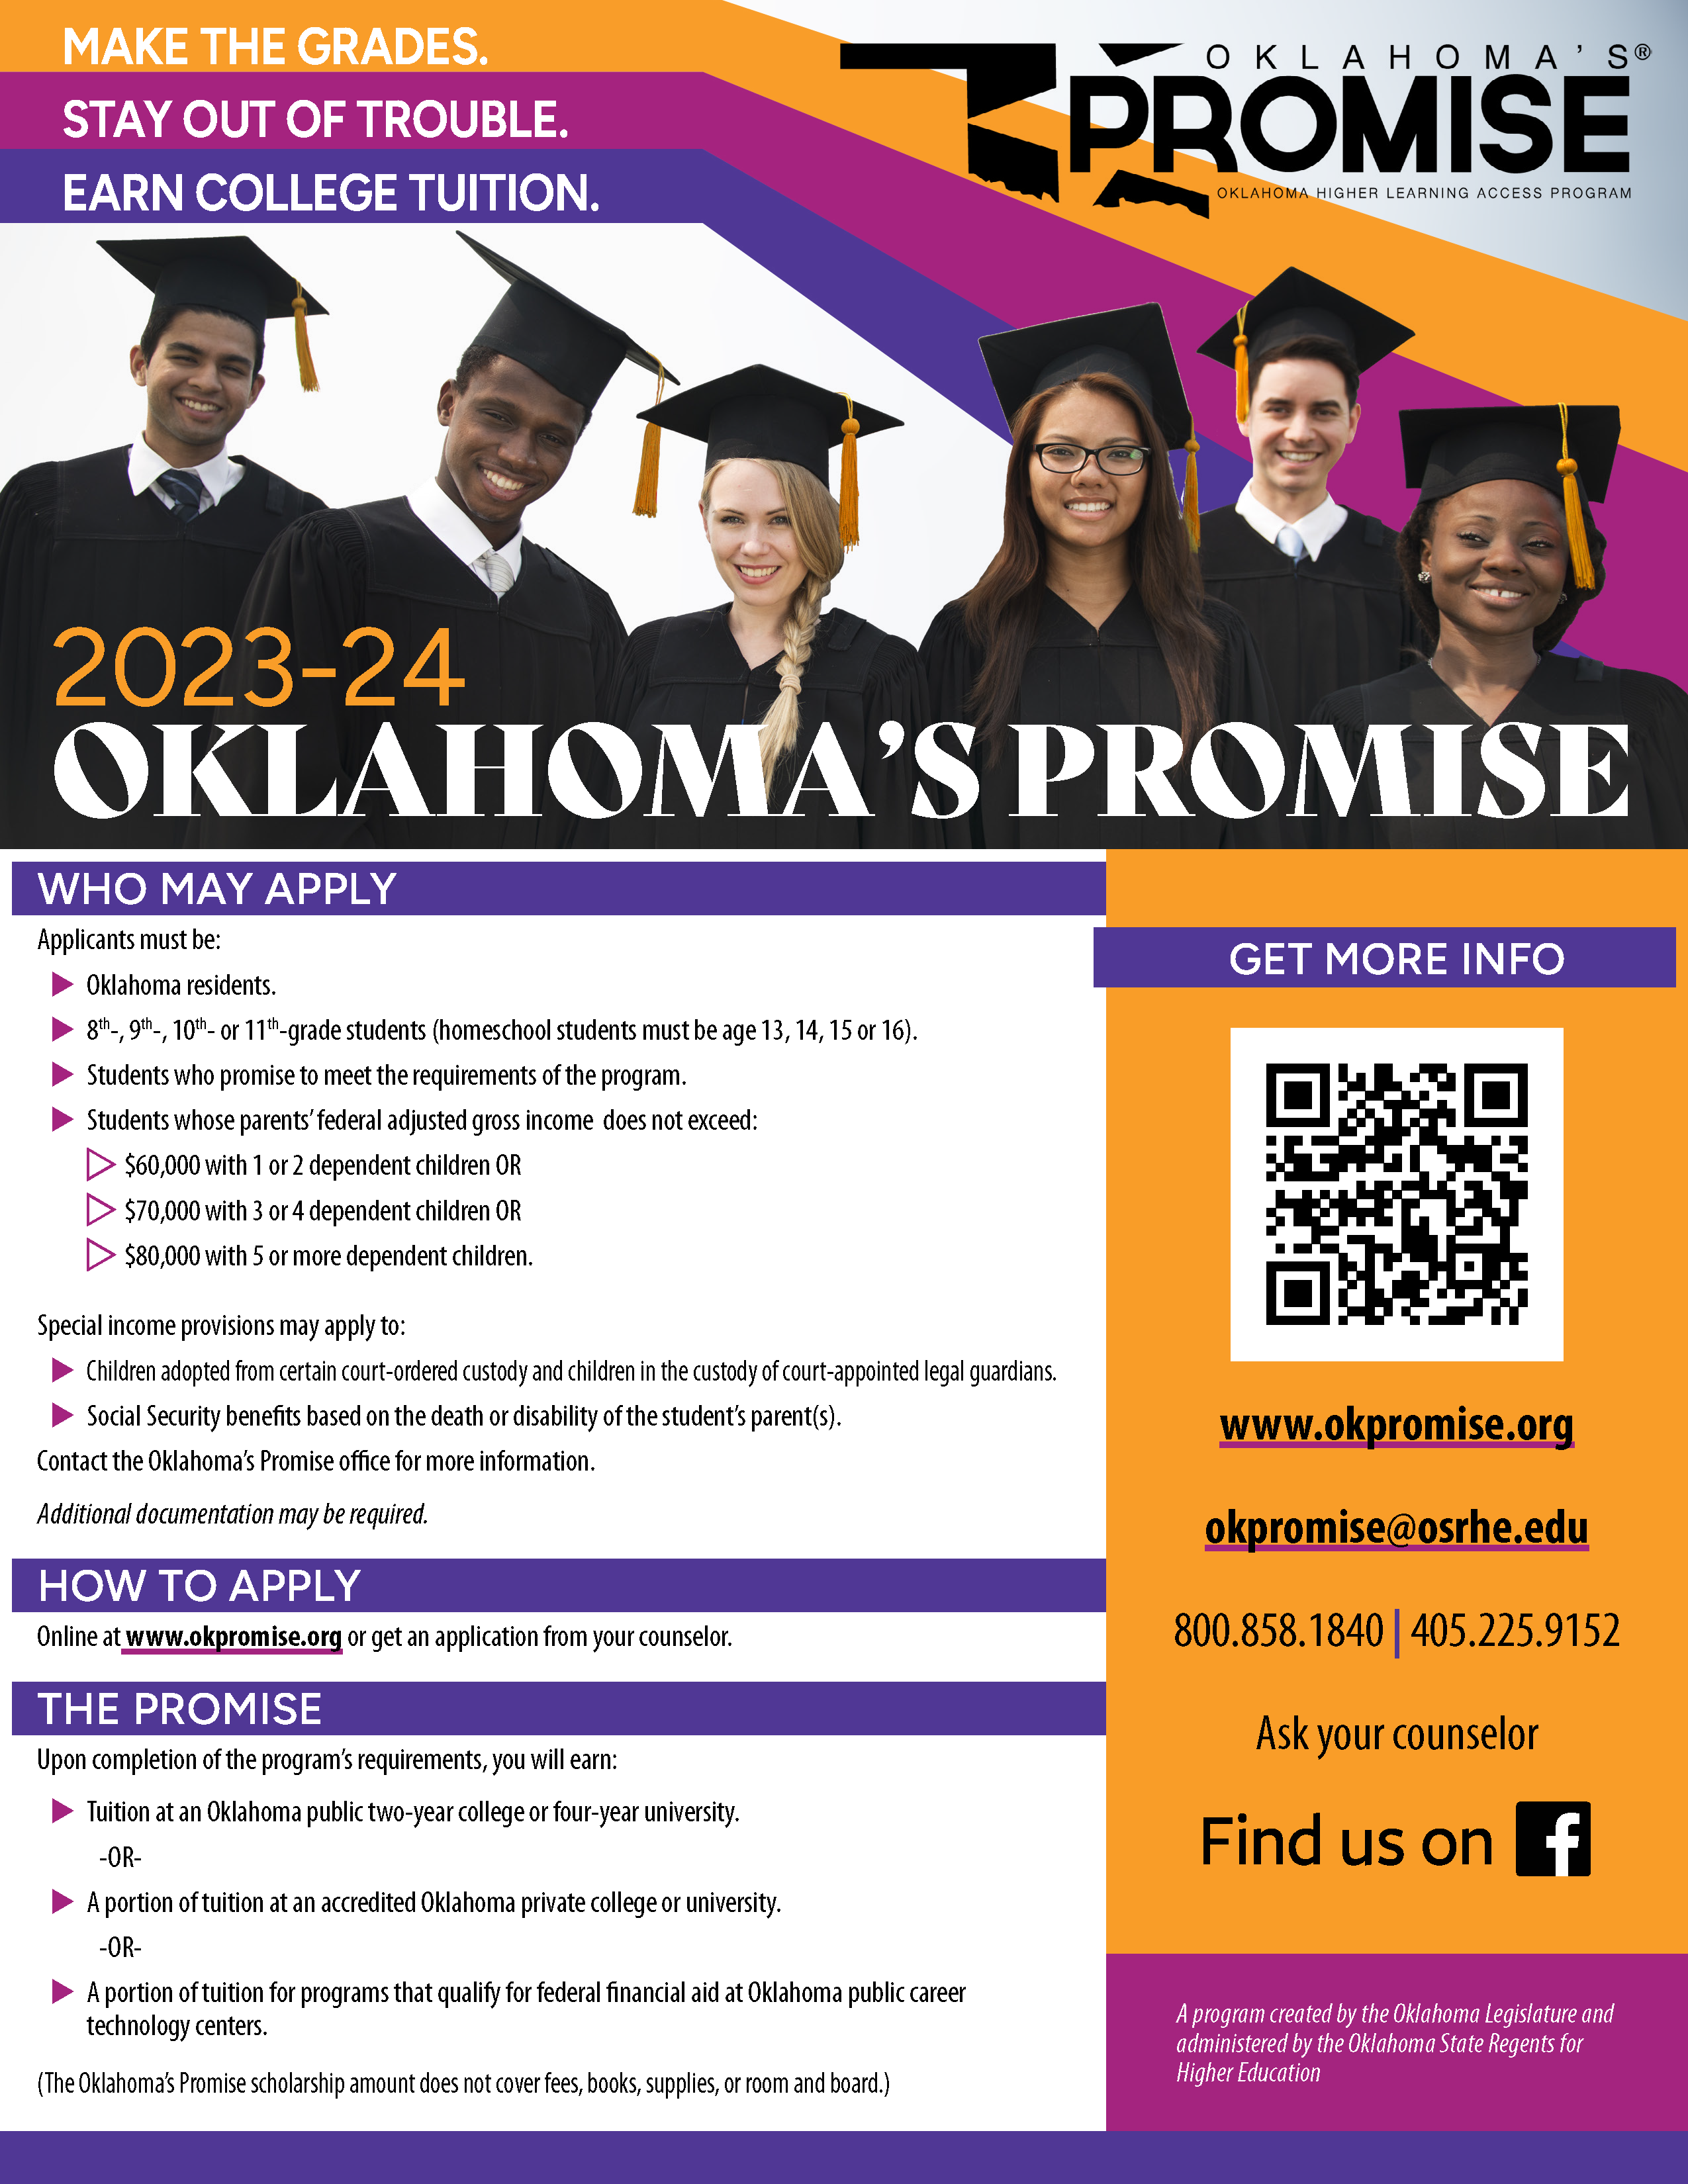 PDF of Oklahoma's Promise Flyer opens in a new tab